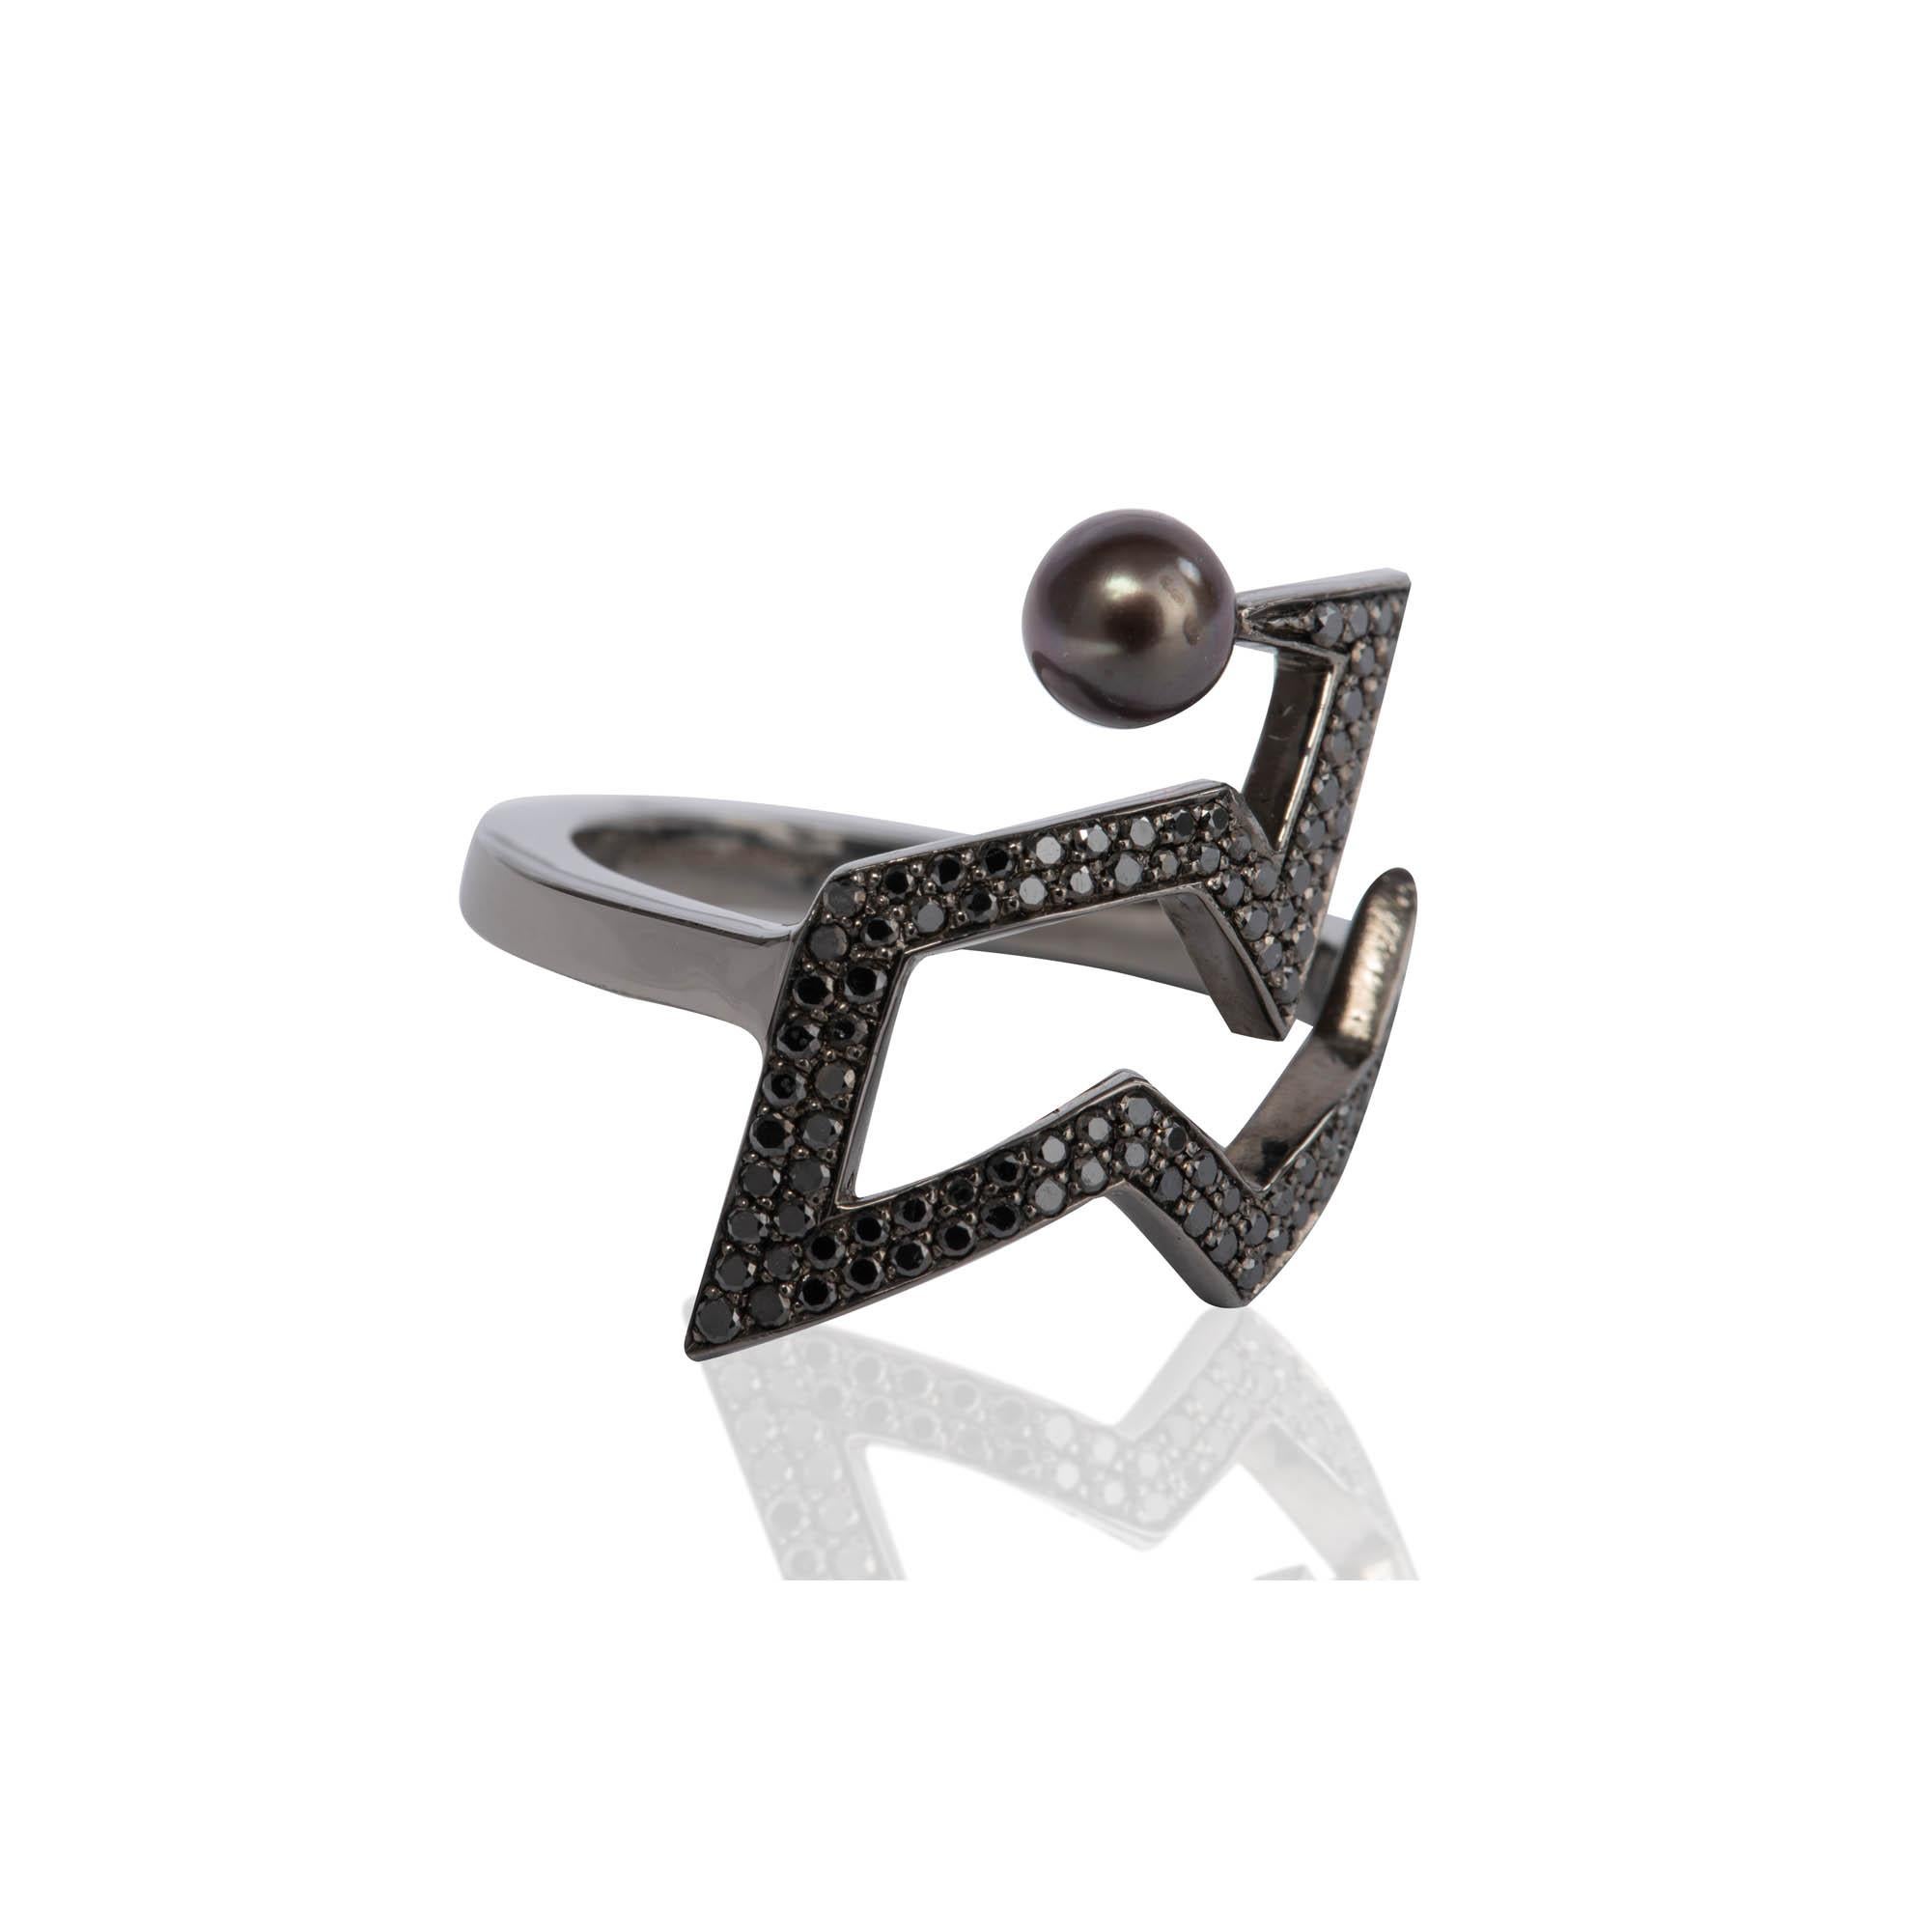 Cocktail Ring in black rhodium over polished sterling silver, set with black diamonds and peacock pearl
Size UK N - US 7 in stock, more sizes available upon request, made to order pieces aren't returnable
Elegant and modern design inspired by the